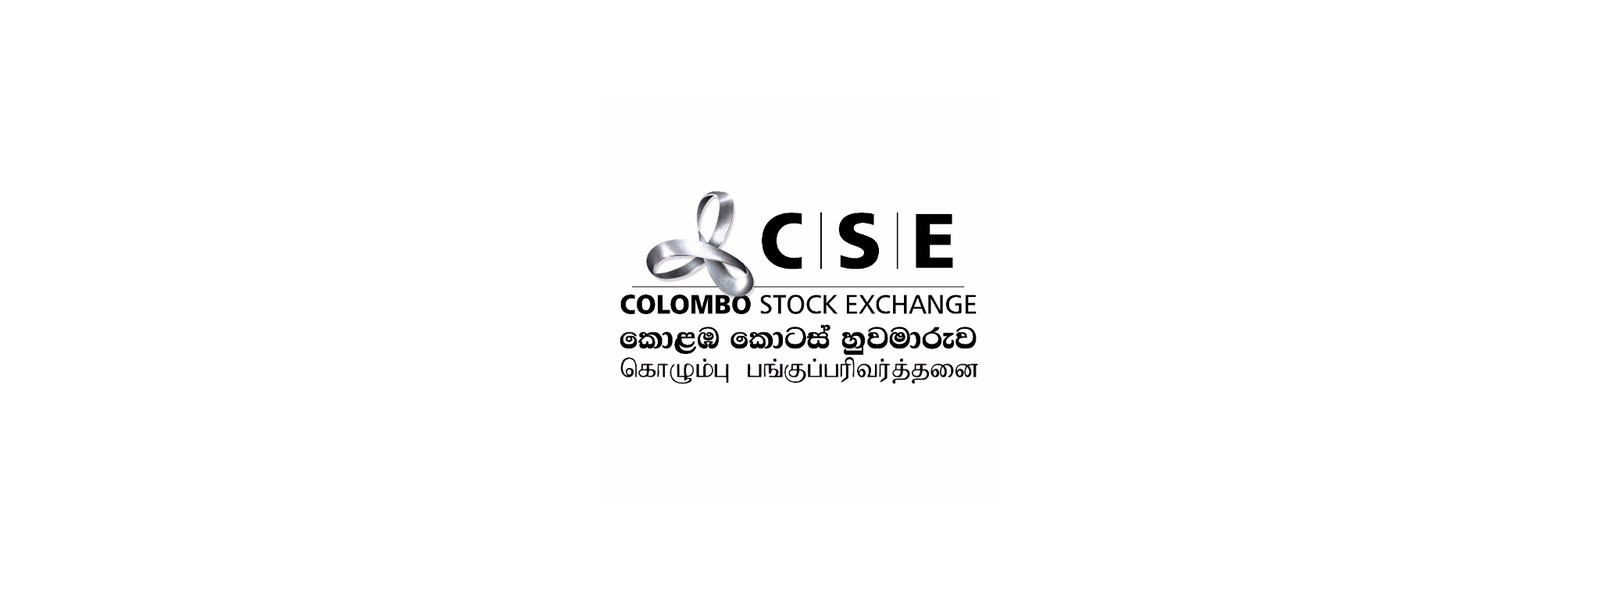 CSE trading halted for 4th time in 05 days